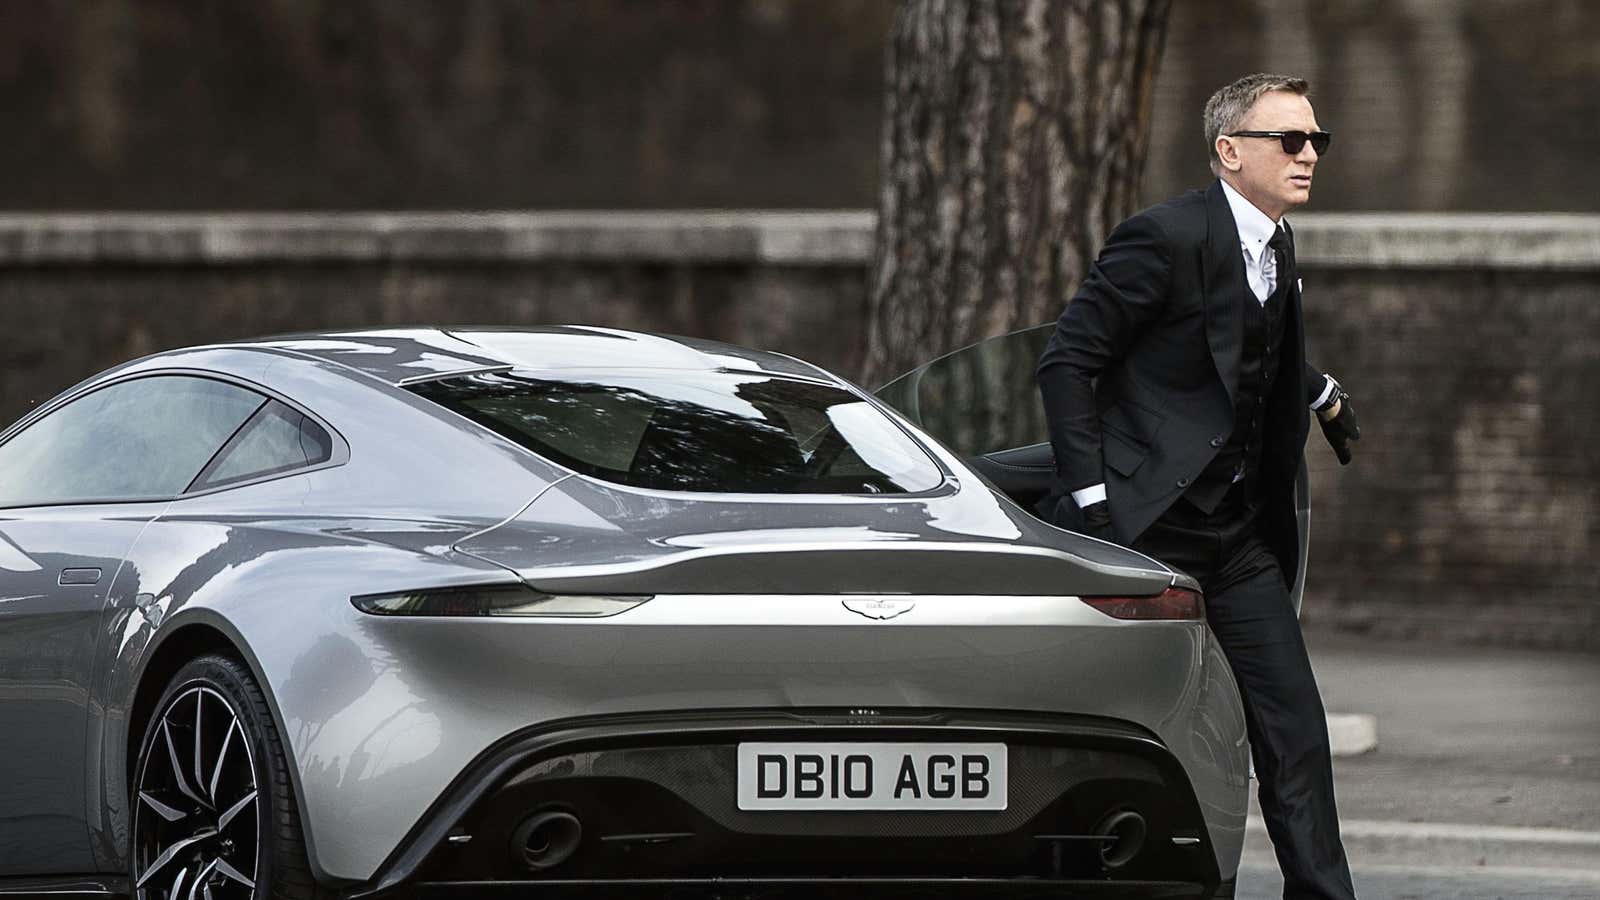 Daniel Craig steps out of a sports car during the shooting of the latest James Bond movie “Spectre”, in Rome.